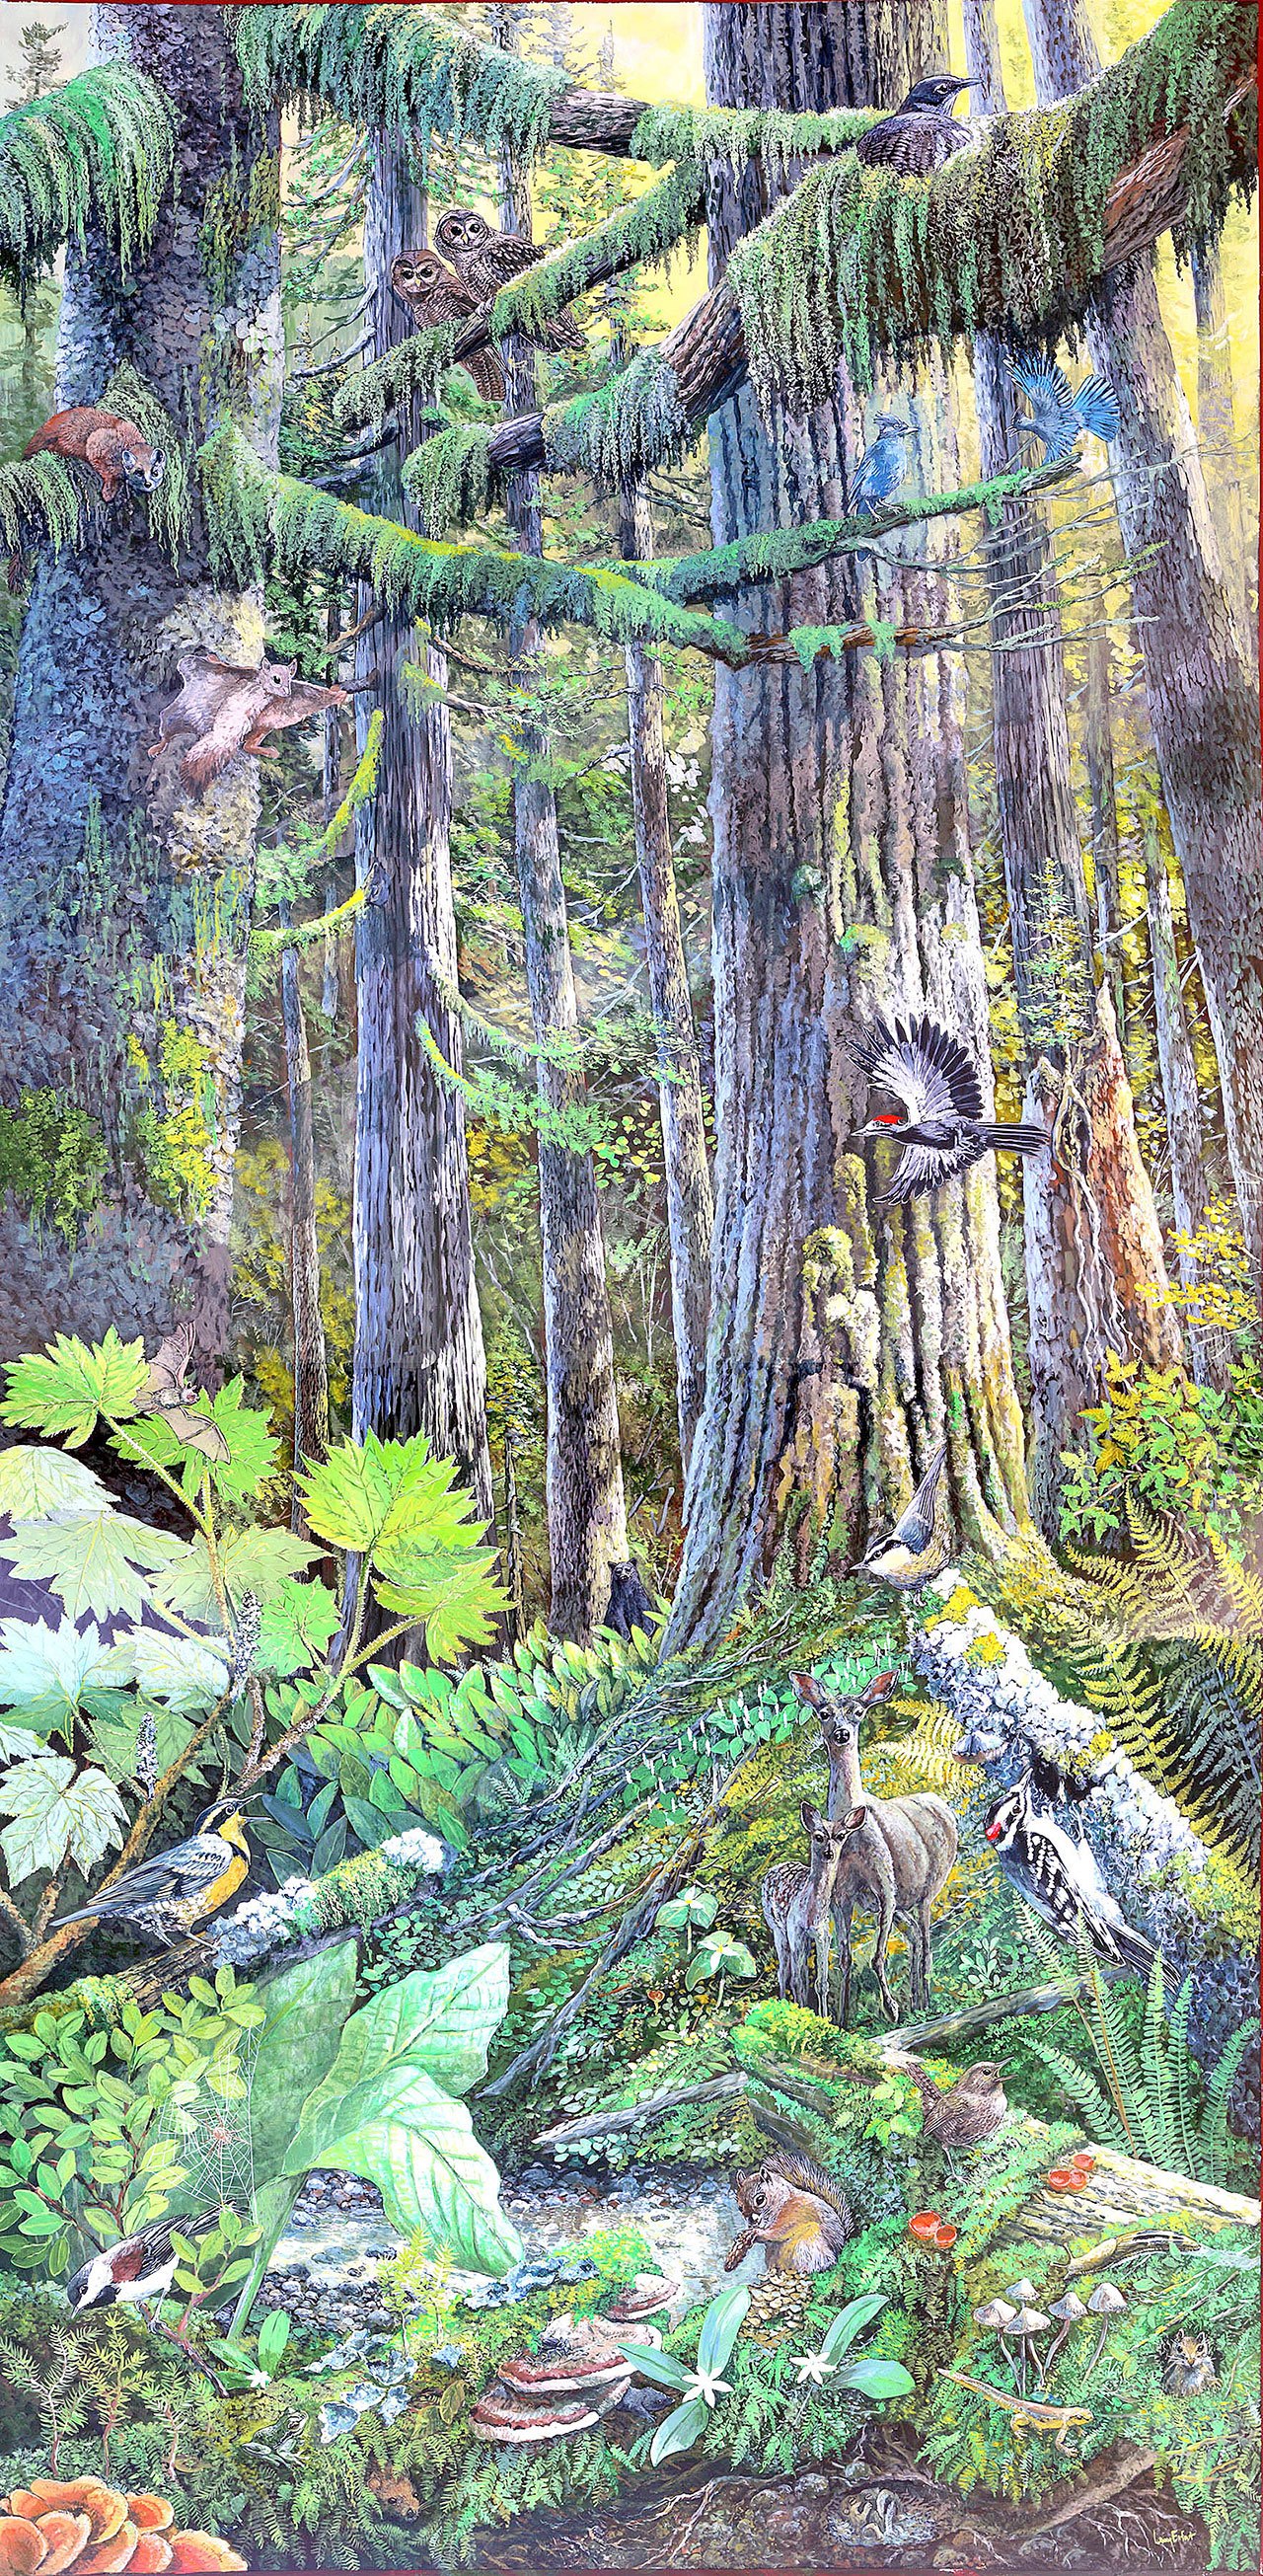 During Art Walk, this painting by Larry Eifert, titled “Carbon River,” will be on display at Gallery 9, 1012 Water St. — Larry Eifert.